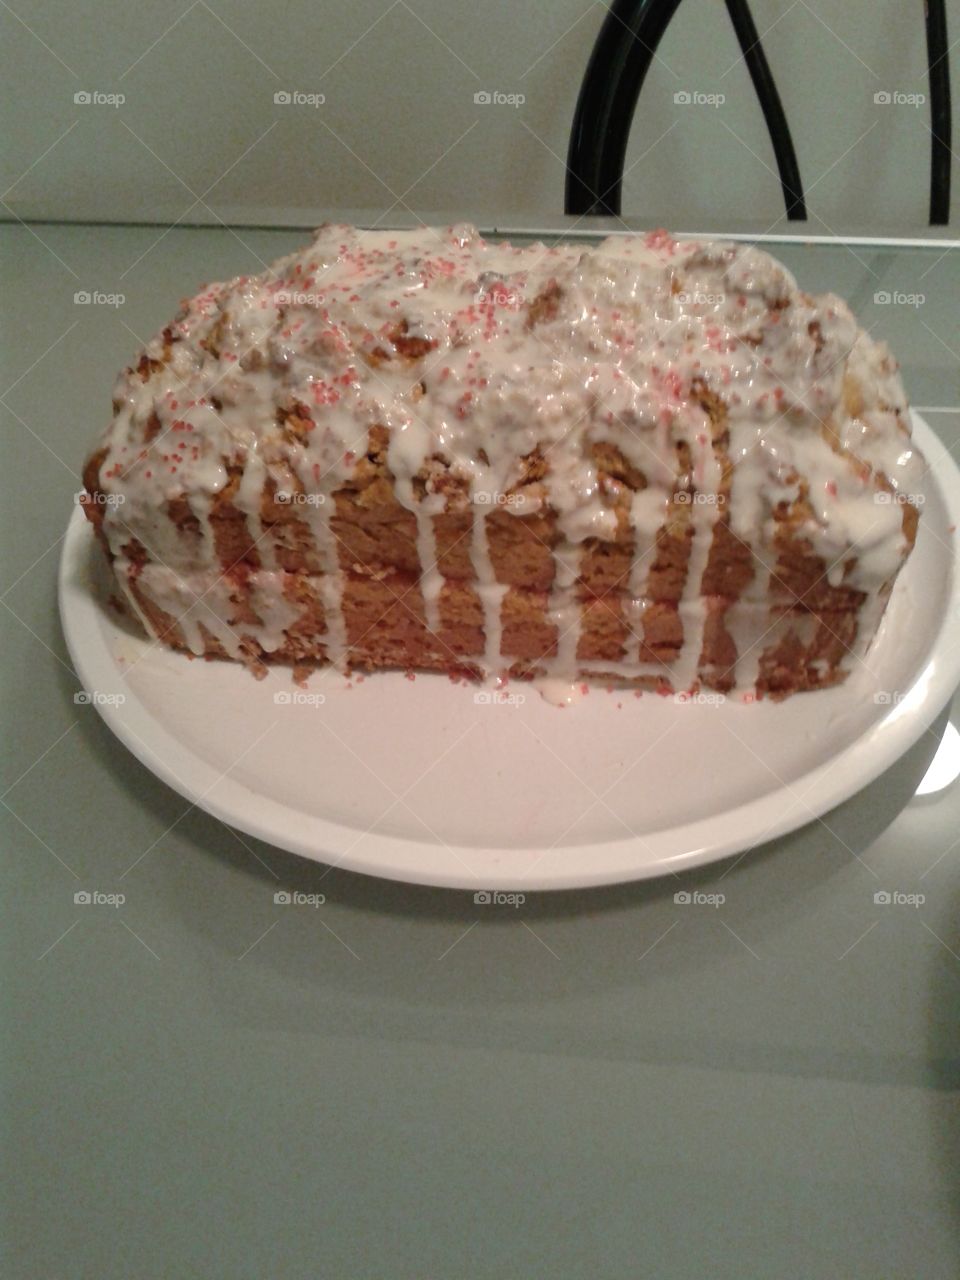 Vanulla Almond Cake. I made this Cake for Coffee Time